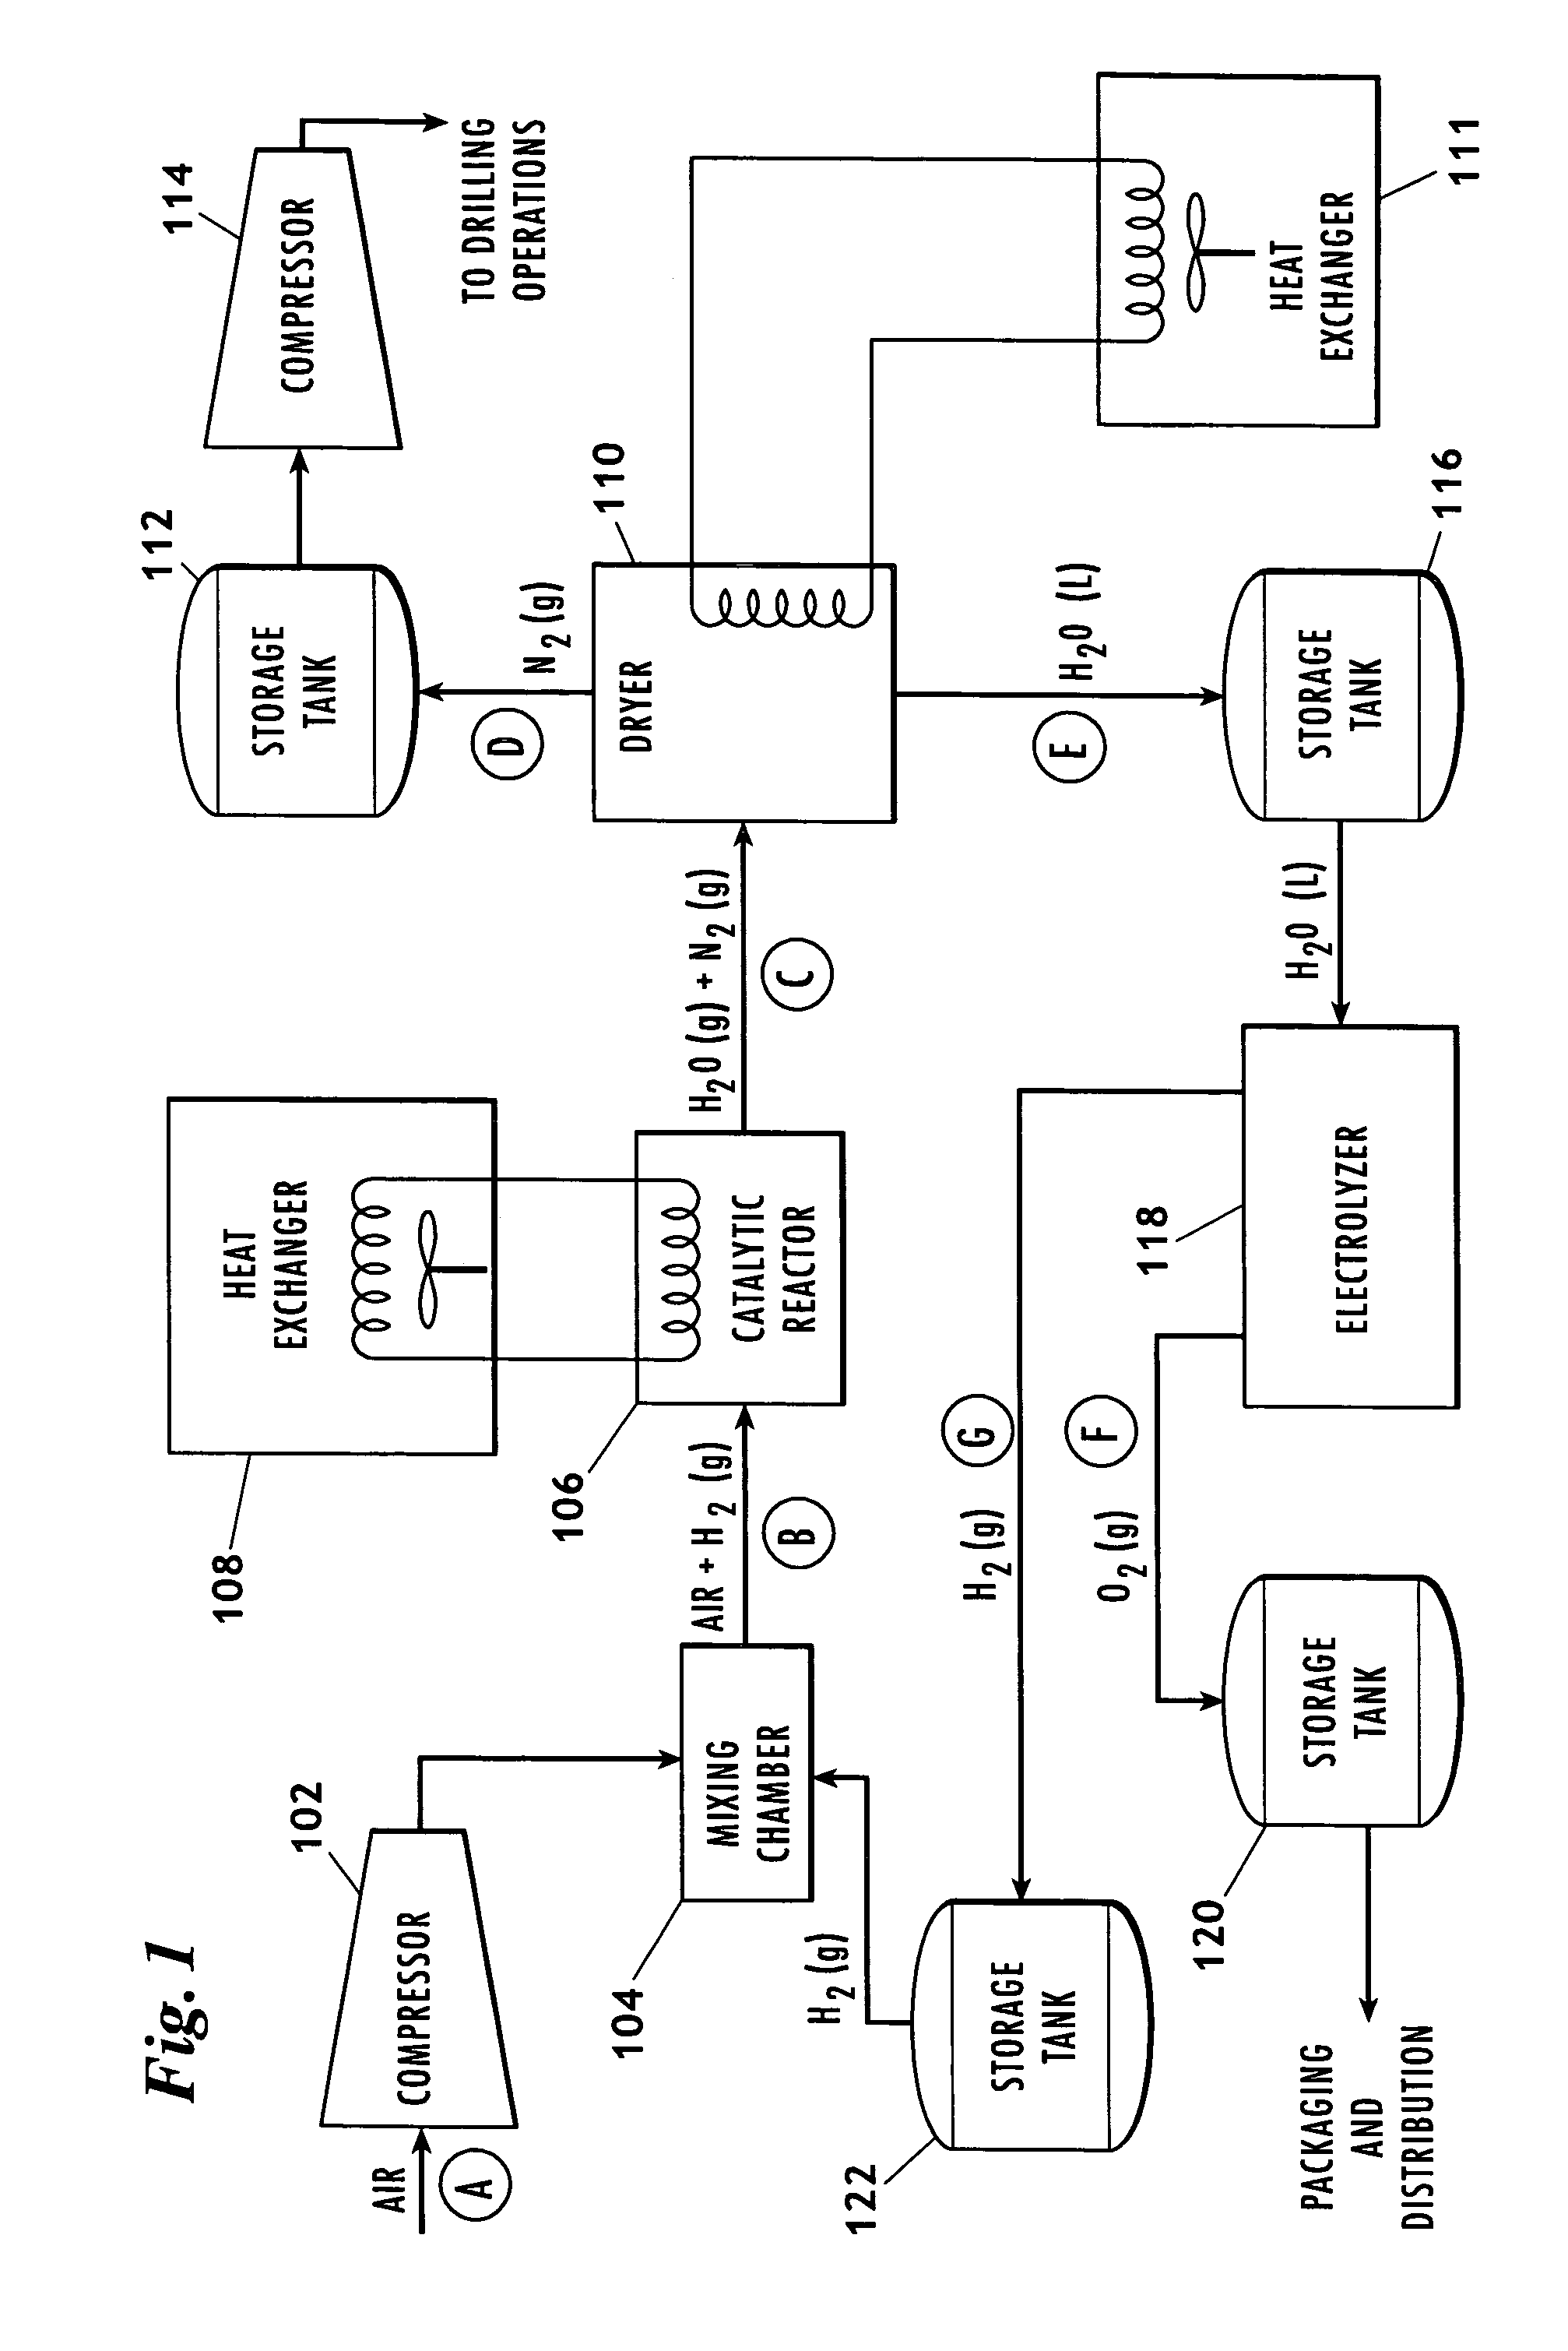 Method for producing nitrogen to use in under balanced drilling, secondary recovery production operations and pipeline maintenance